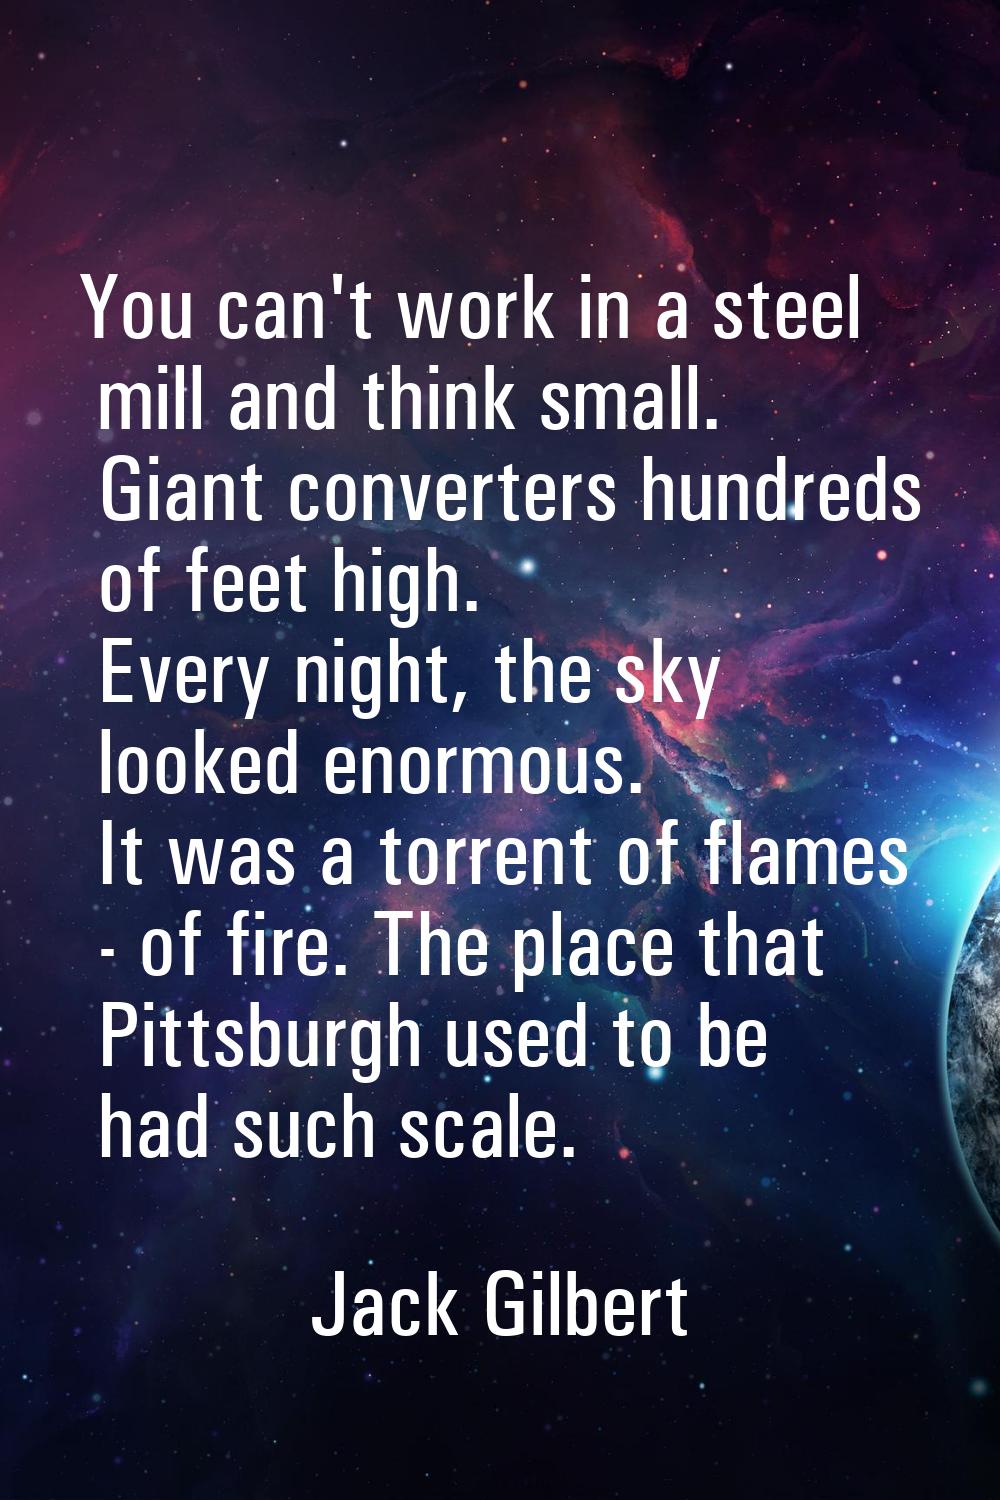 You can't work in a steel mill and think small. Giant converters hundreds of feet high. Every night